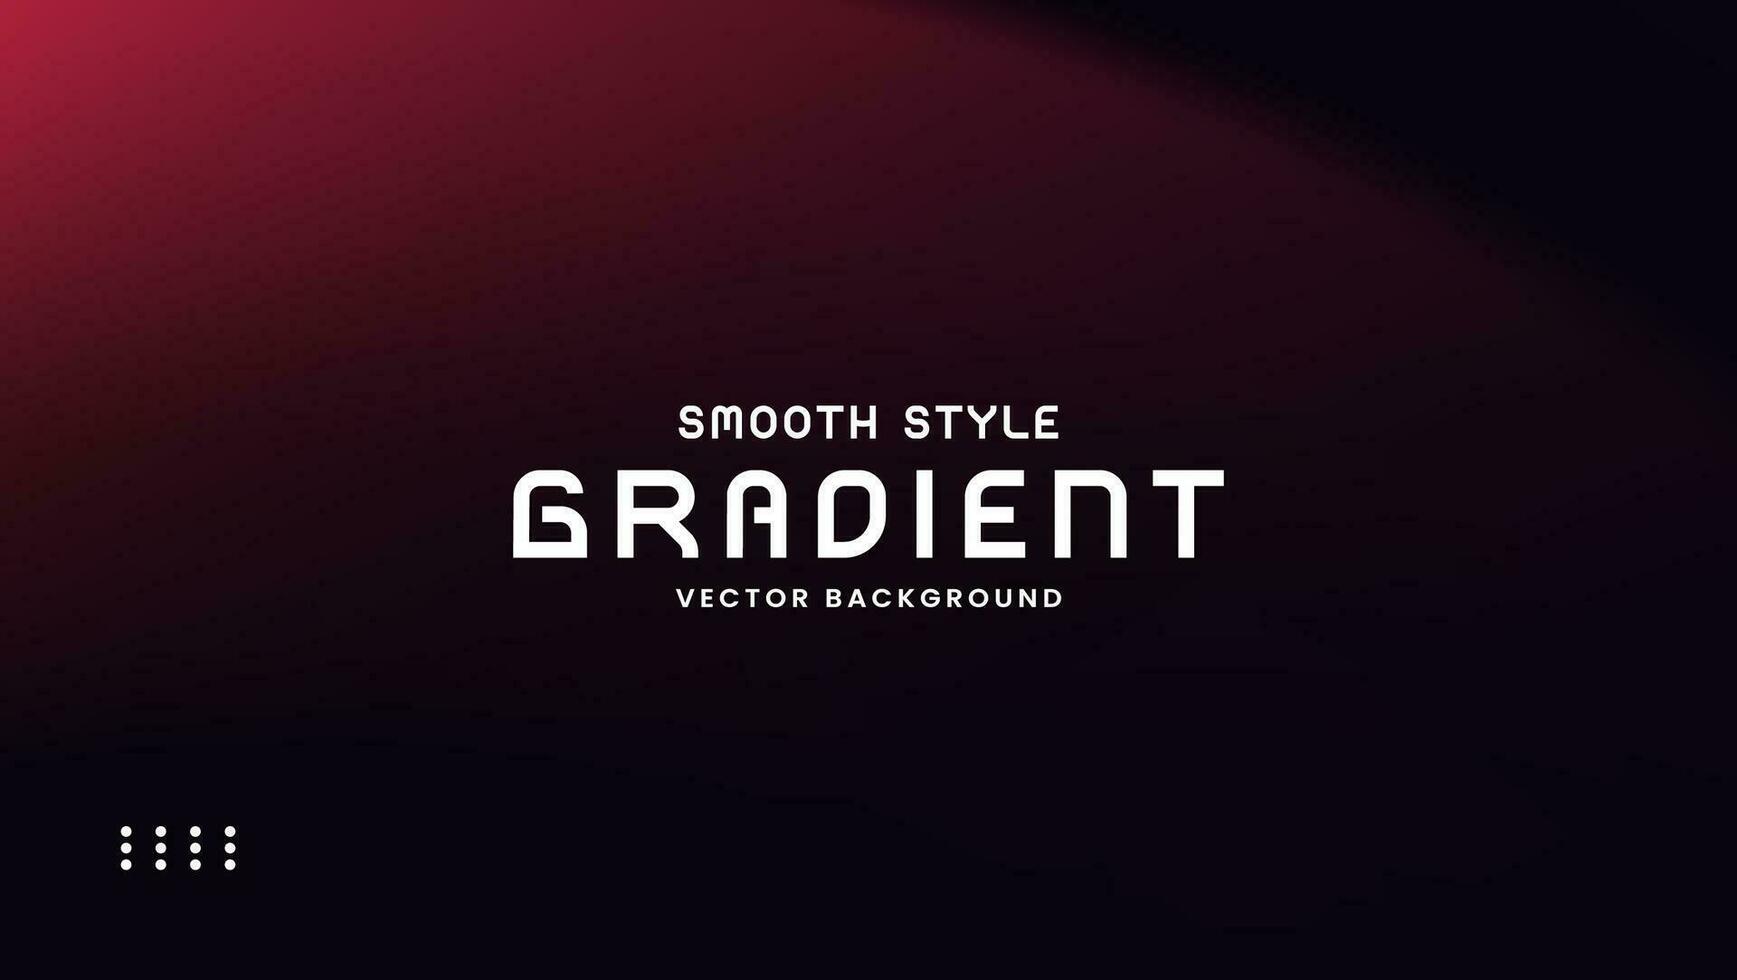 Smooth gradient background with black and red color vector